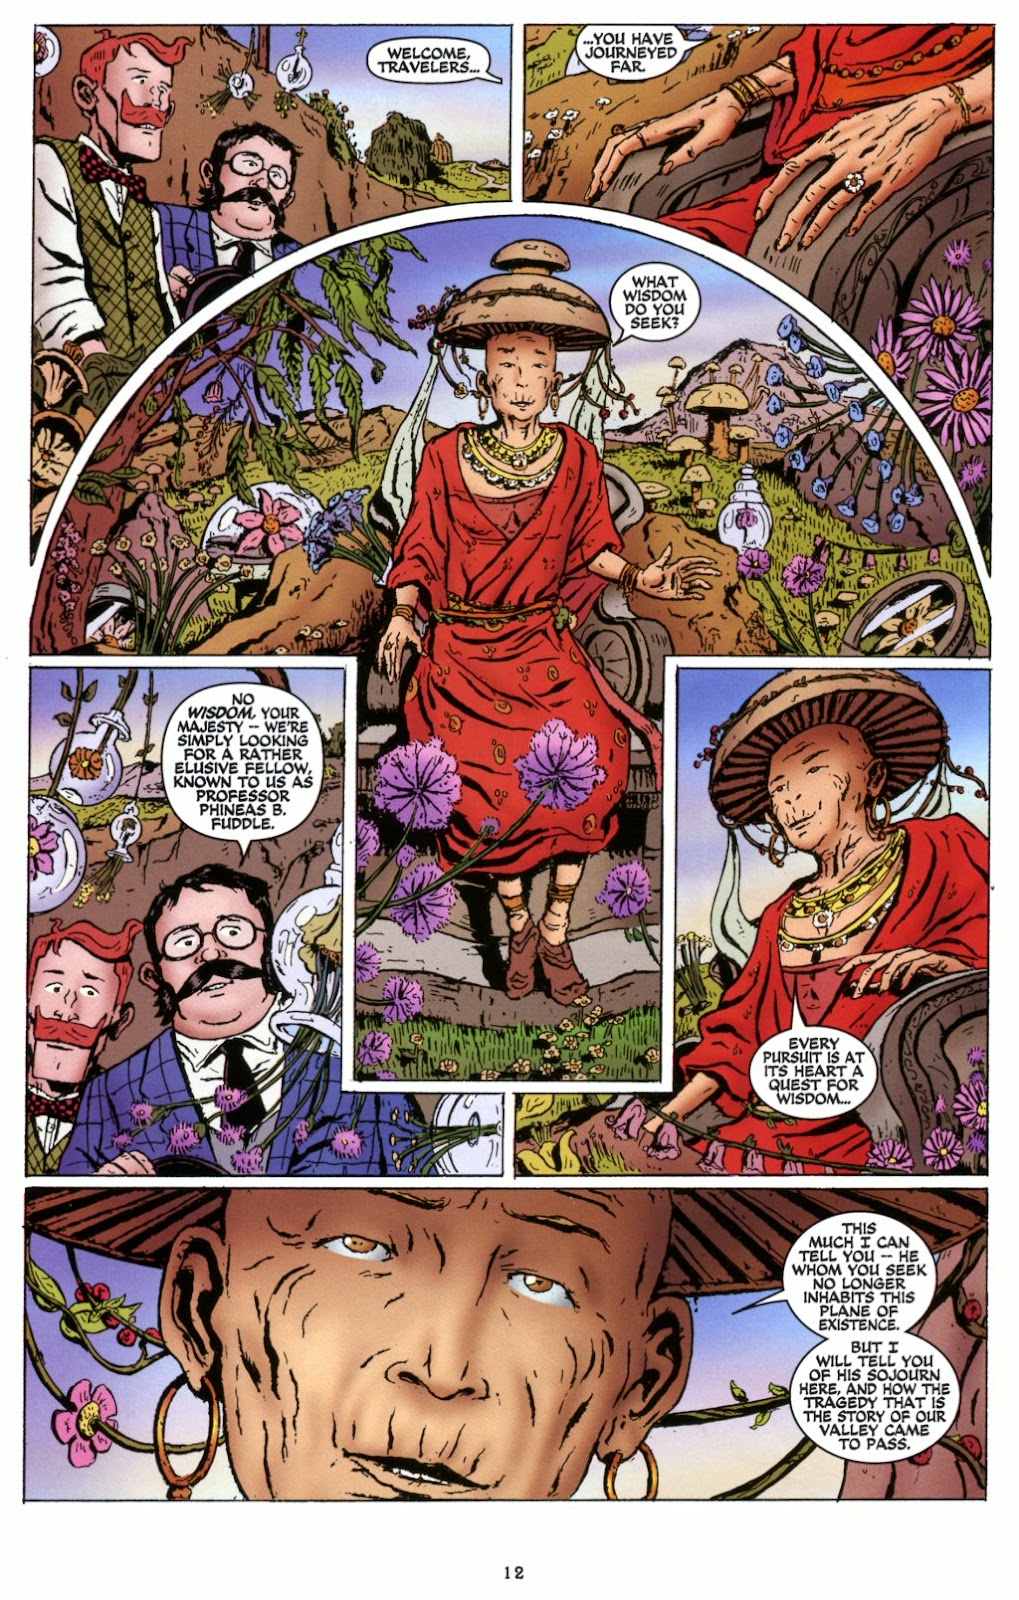 The Remarkable Worlds of Professor Phineas B. Fuddle issue 3 - Page 13